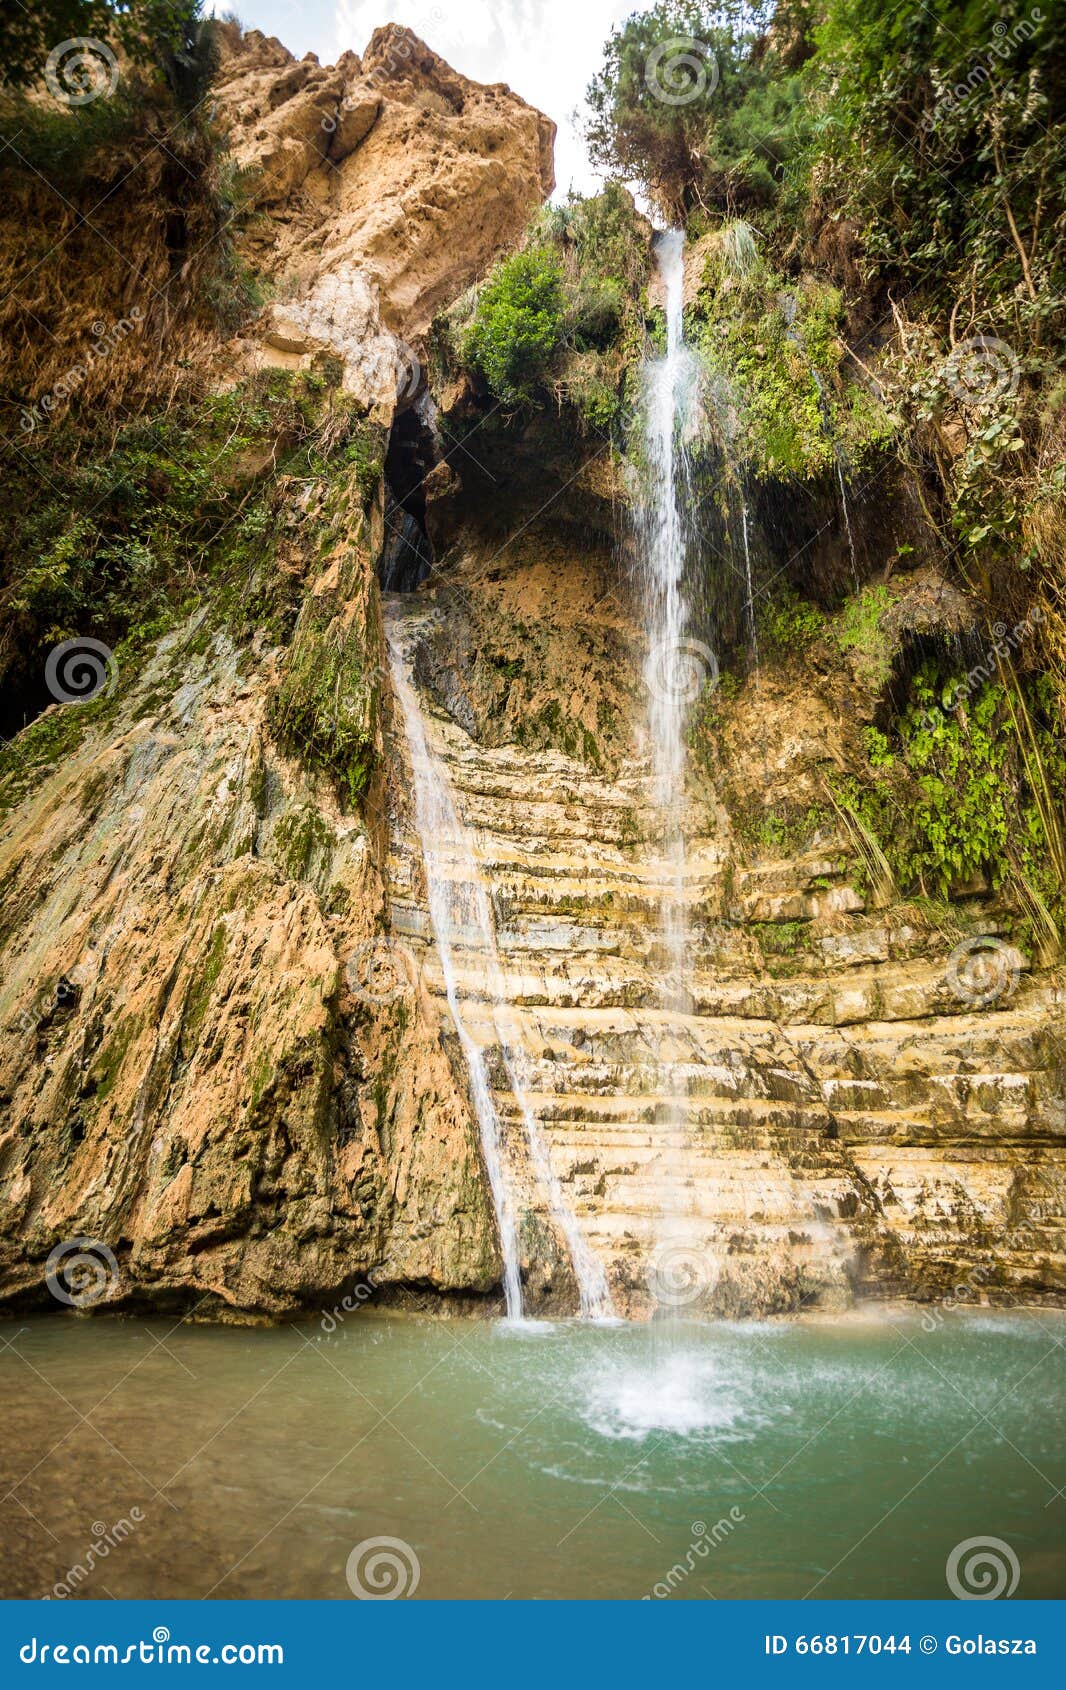 waterfall in en gedi nature reserve and national park